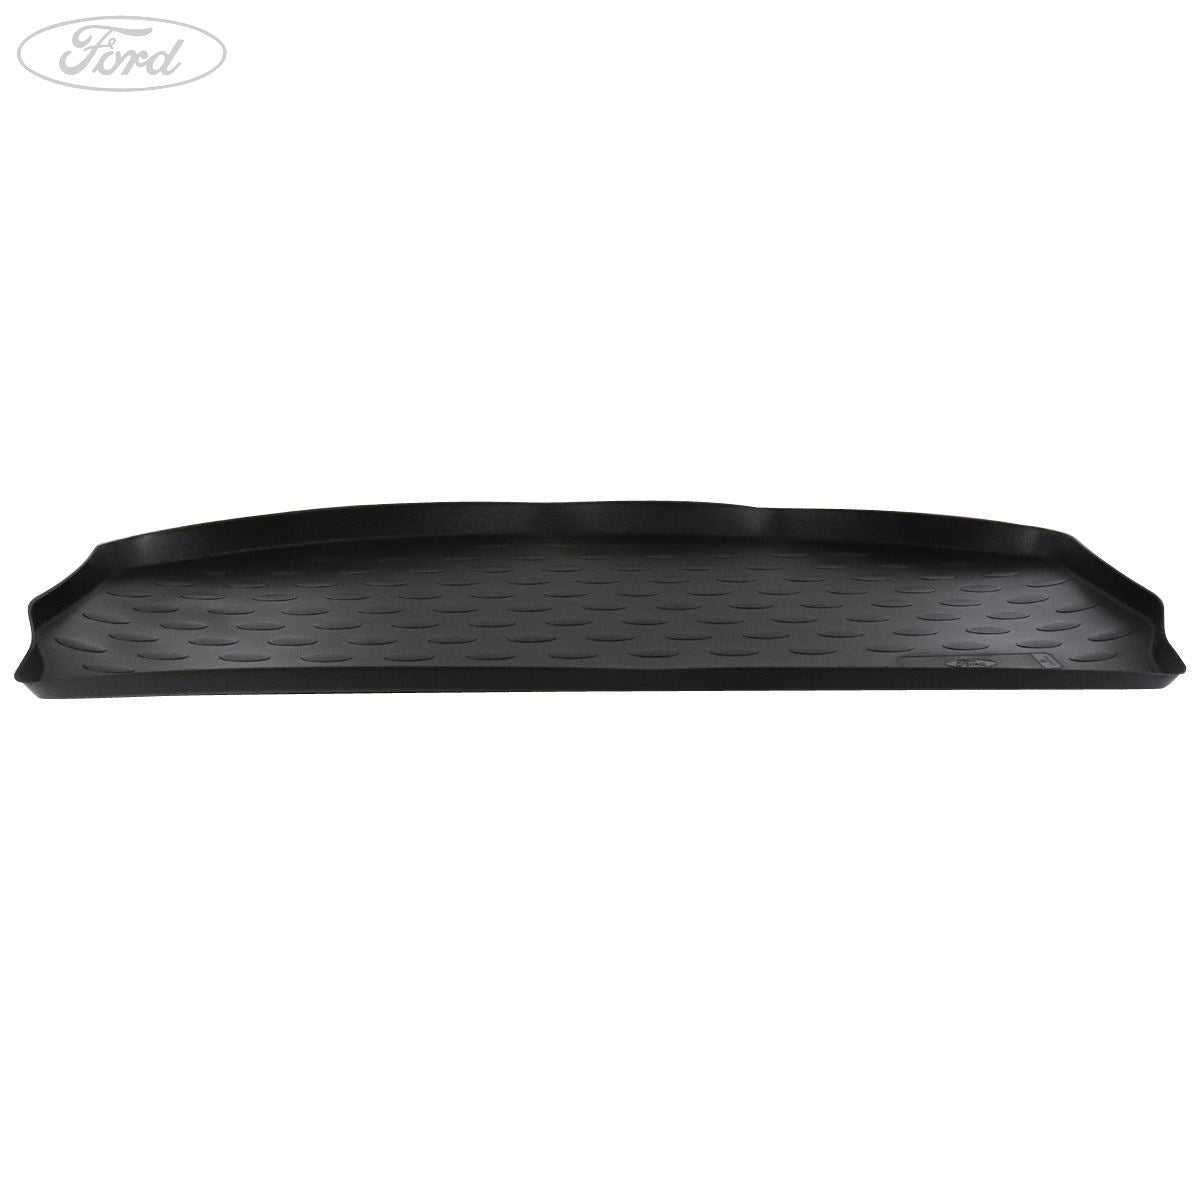 Ford, TRANSIT RUBBER OVERHEAD LOADING COMPARTMENT MAT